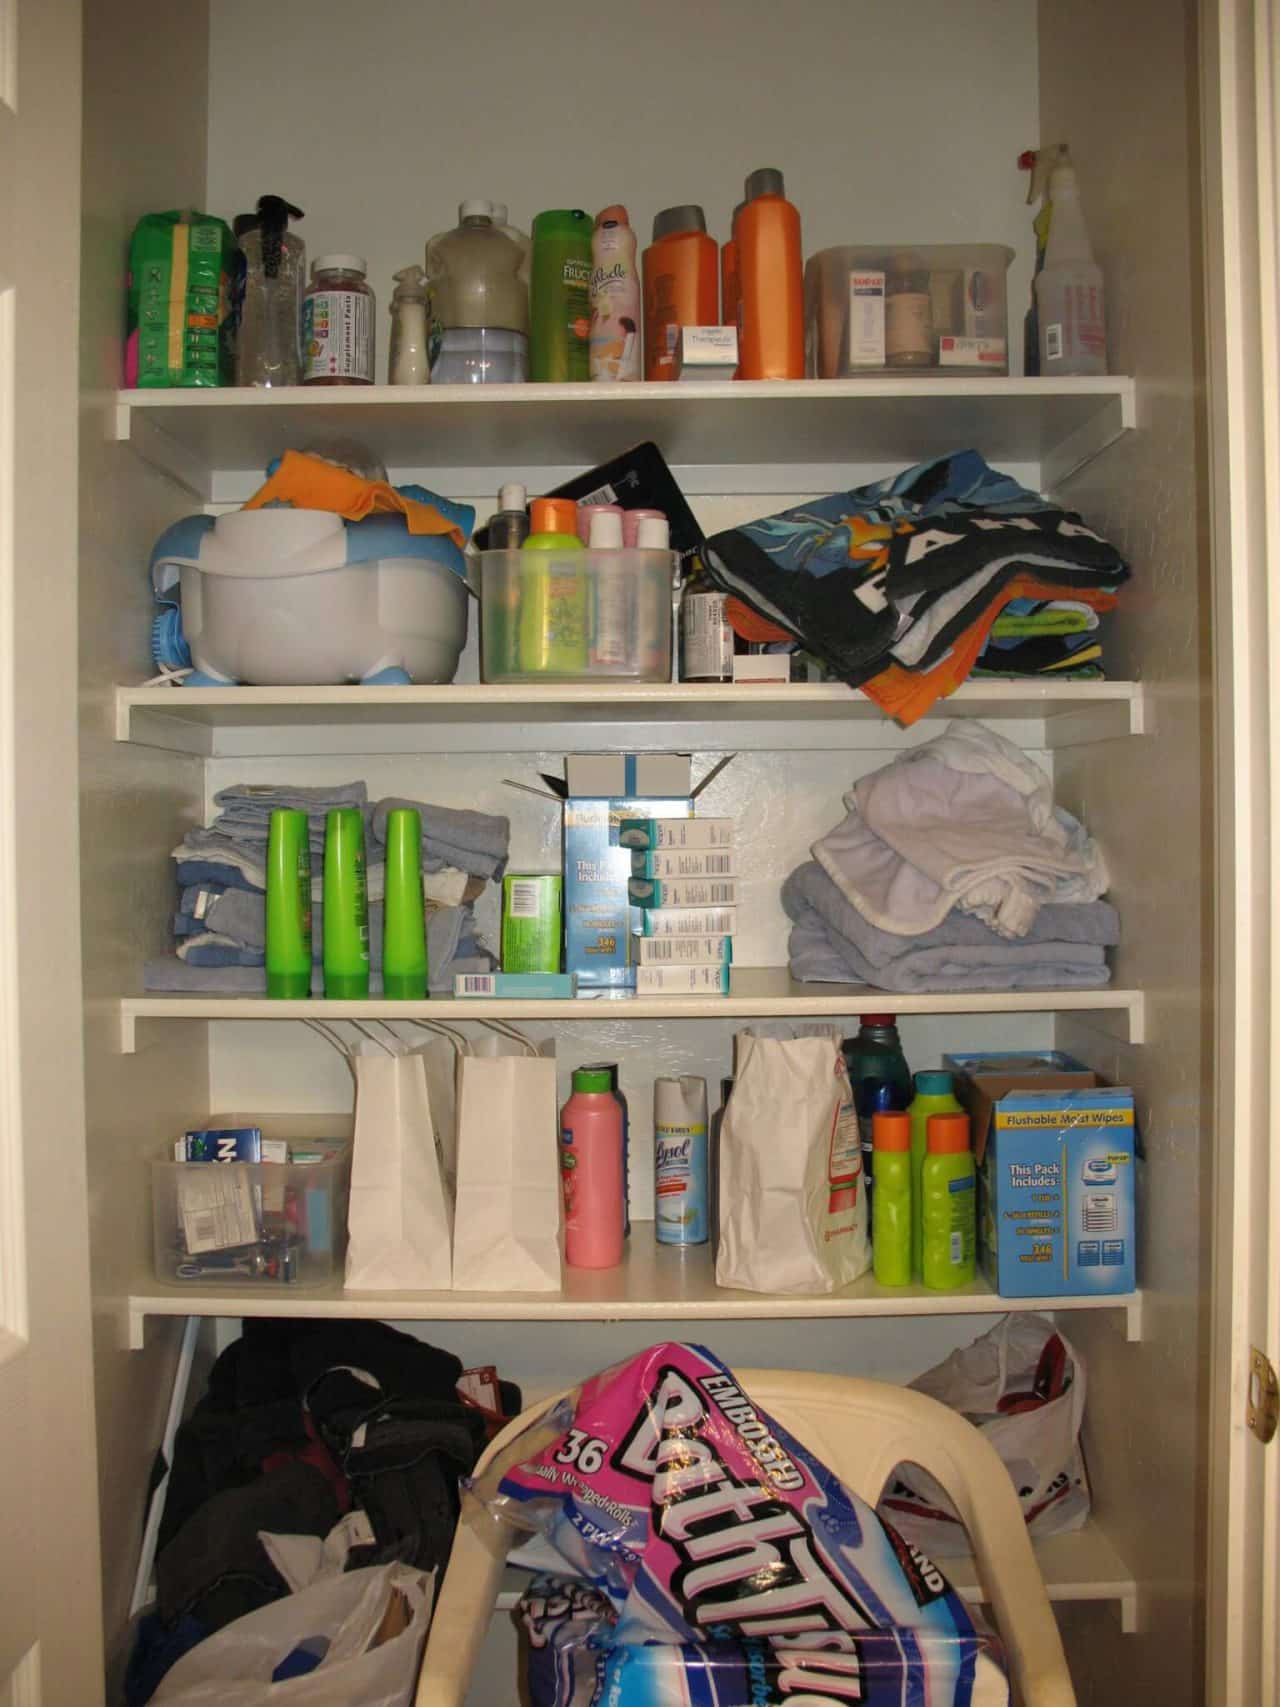 Bathroom closet with items haphazardly on shelves and no organization